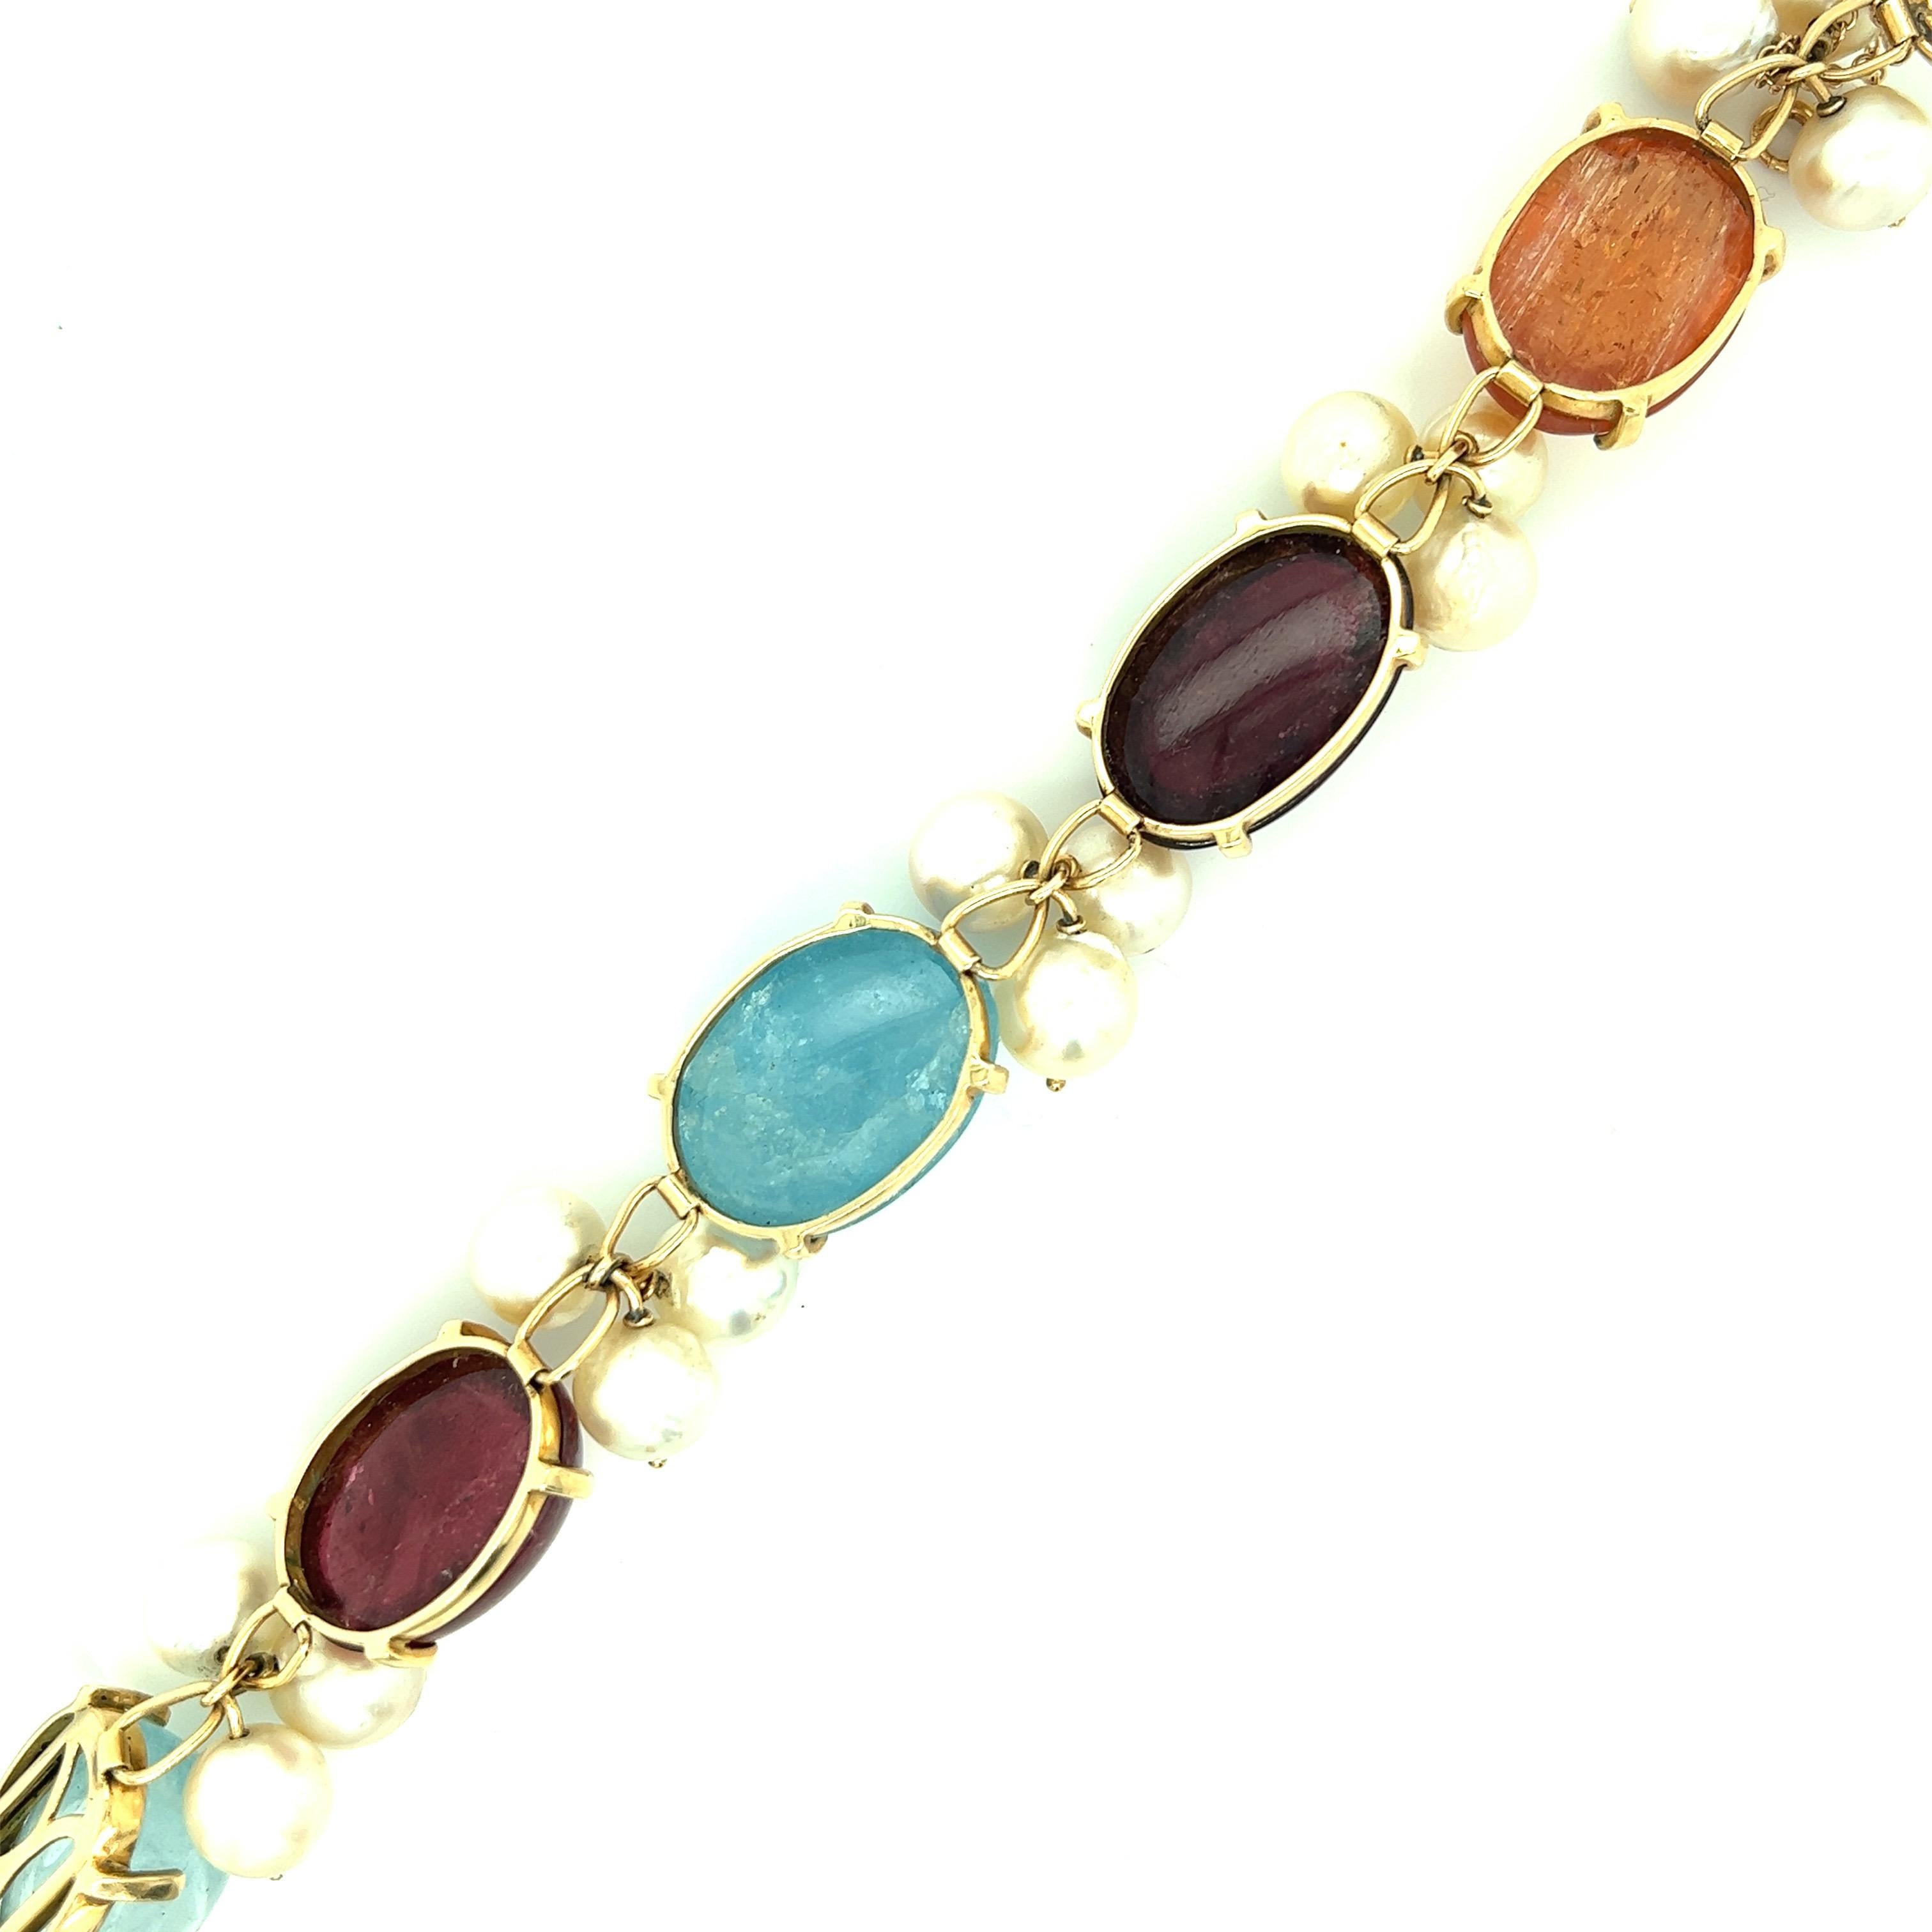 A 14 karat yellow gold bracelet featuring multiple gems, including citrine, tourmalines, and aquamarines. Marked: 14kt. Total weight: 52.1 grams. Inner circumference: 7.25 inches. 